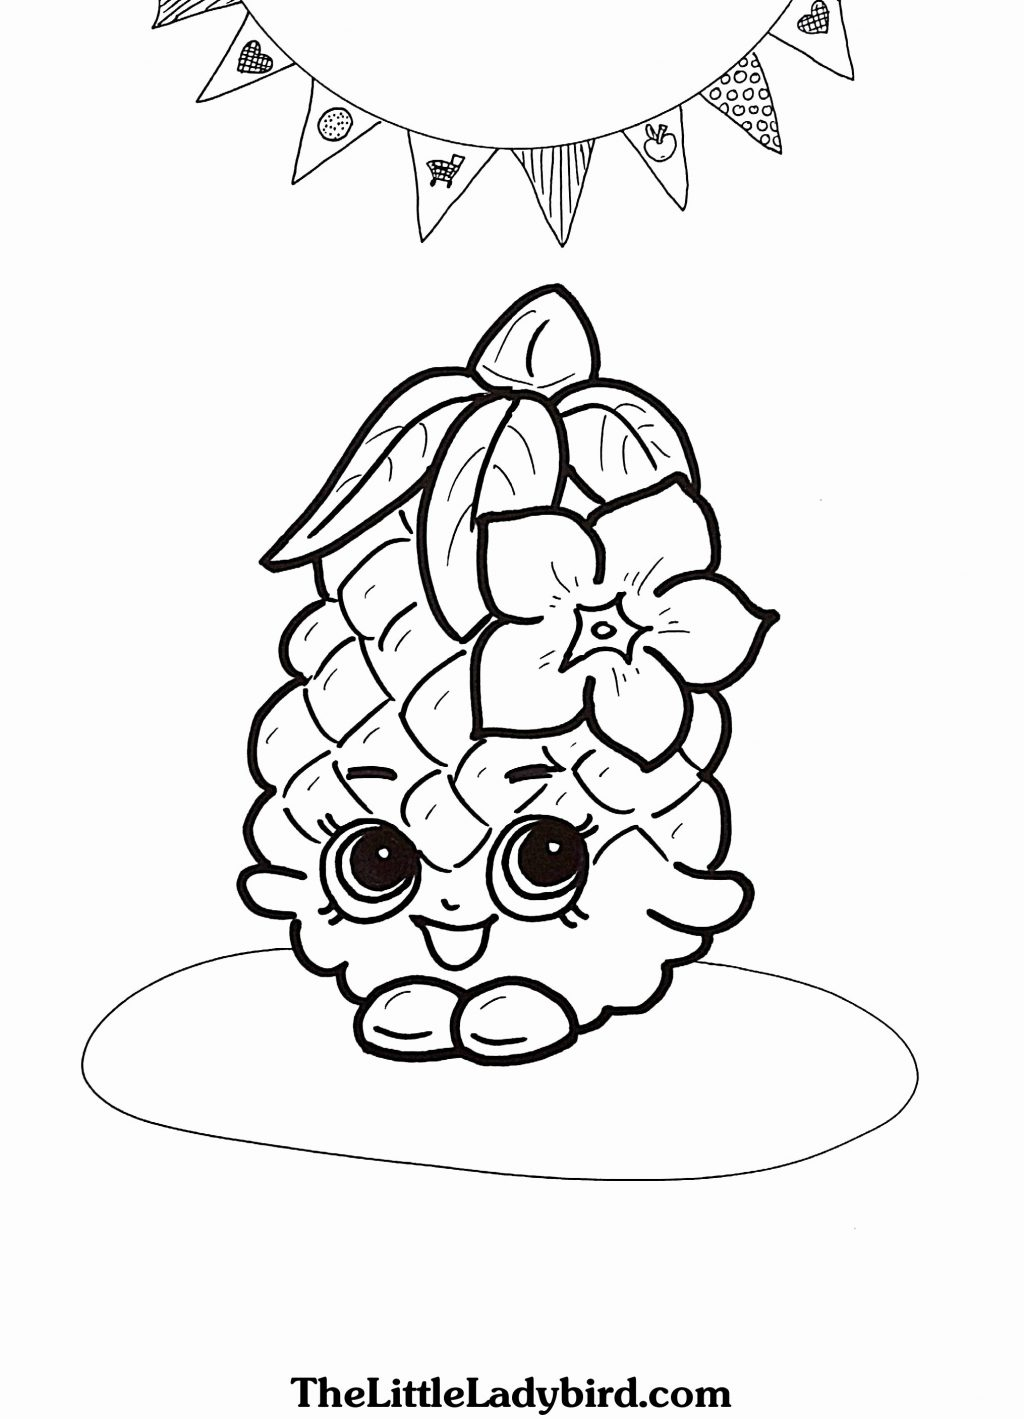 Lost Ocean Coloring Book Pages Coloring Pages You Can Make Your Own Coloring Book As For Kids Art